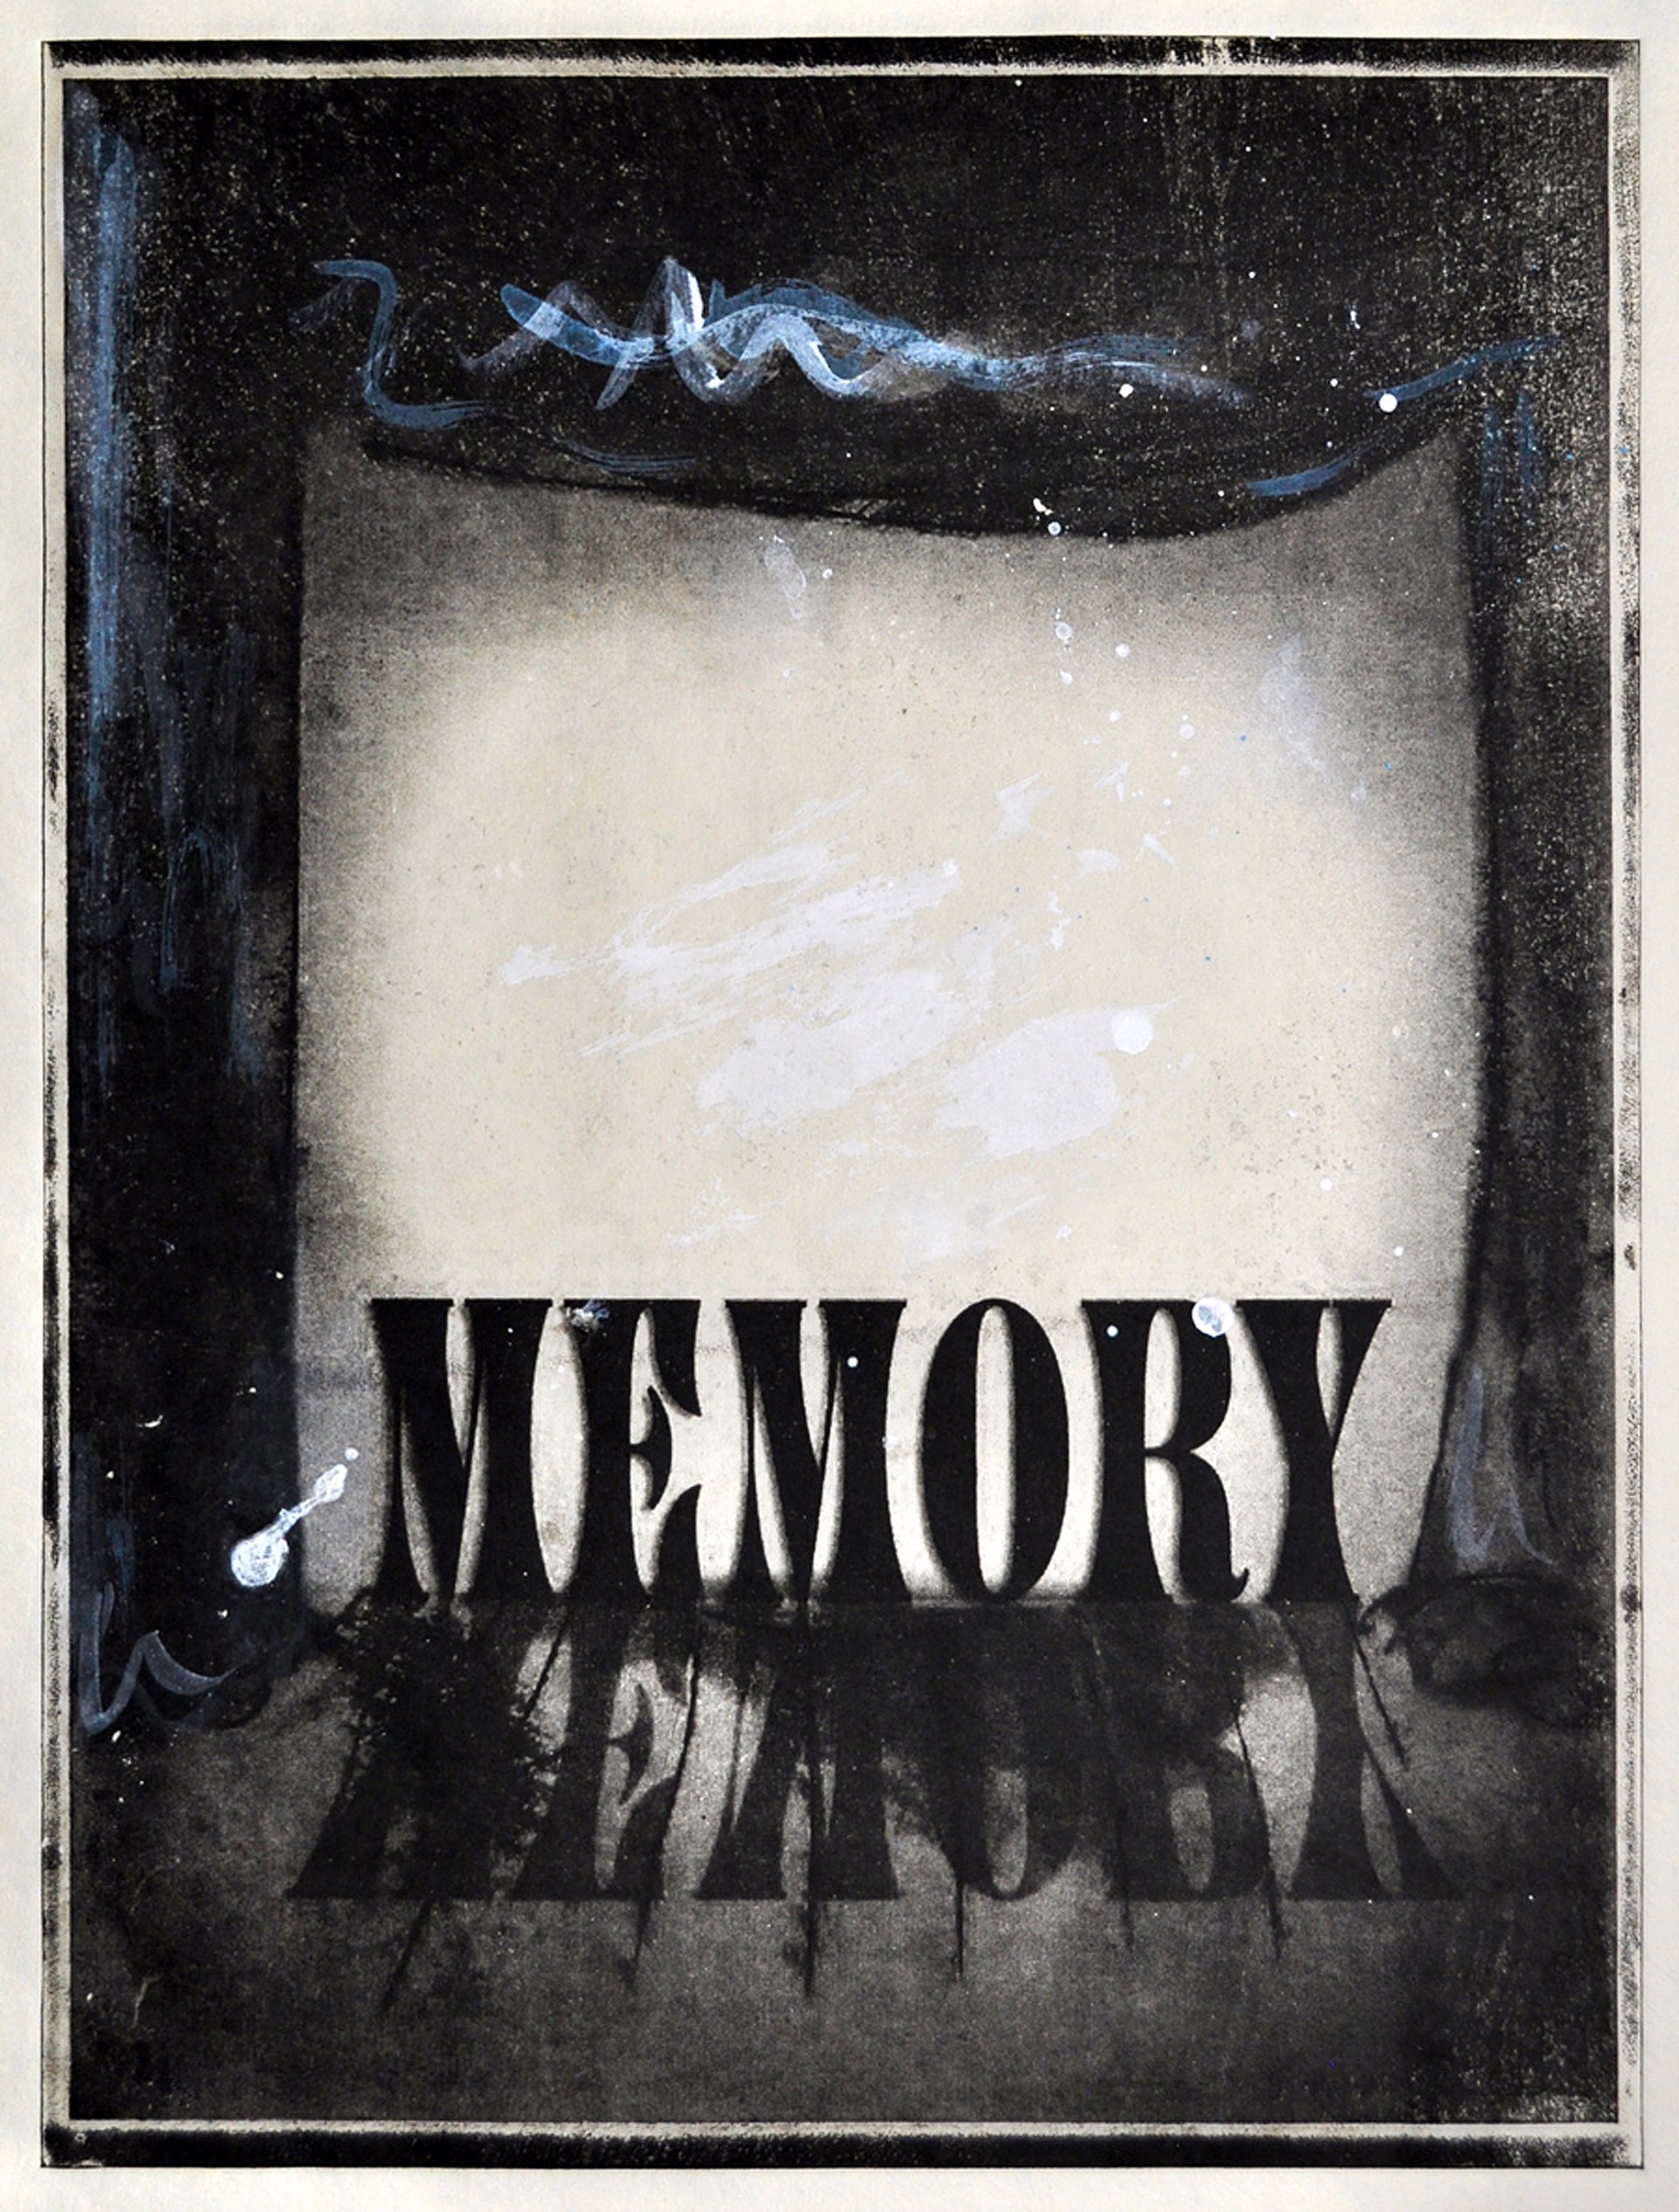 Theater of Memory Act II by Anne Beresford